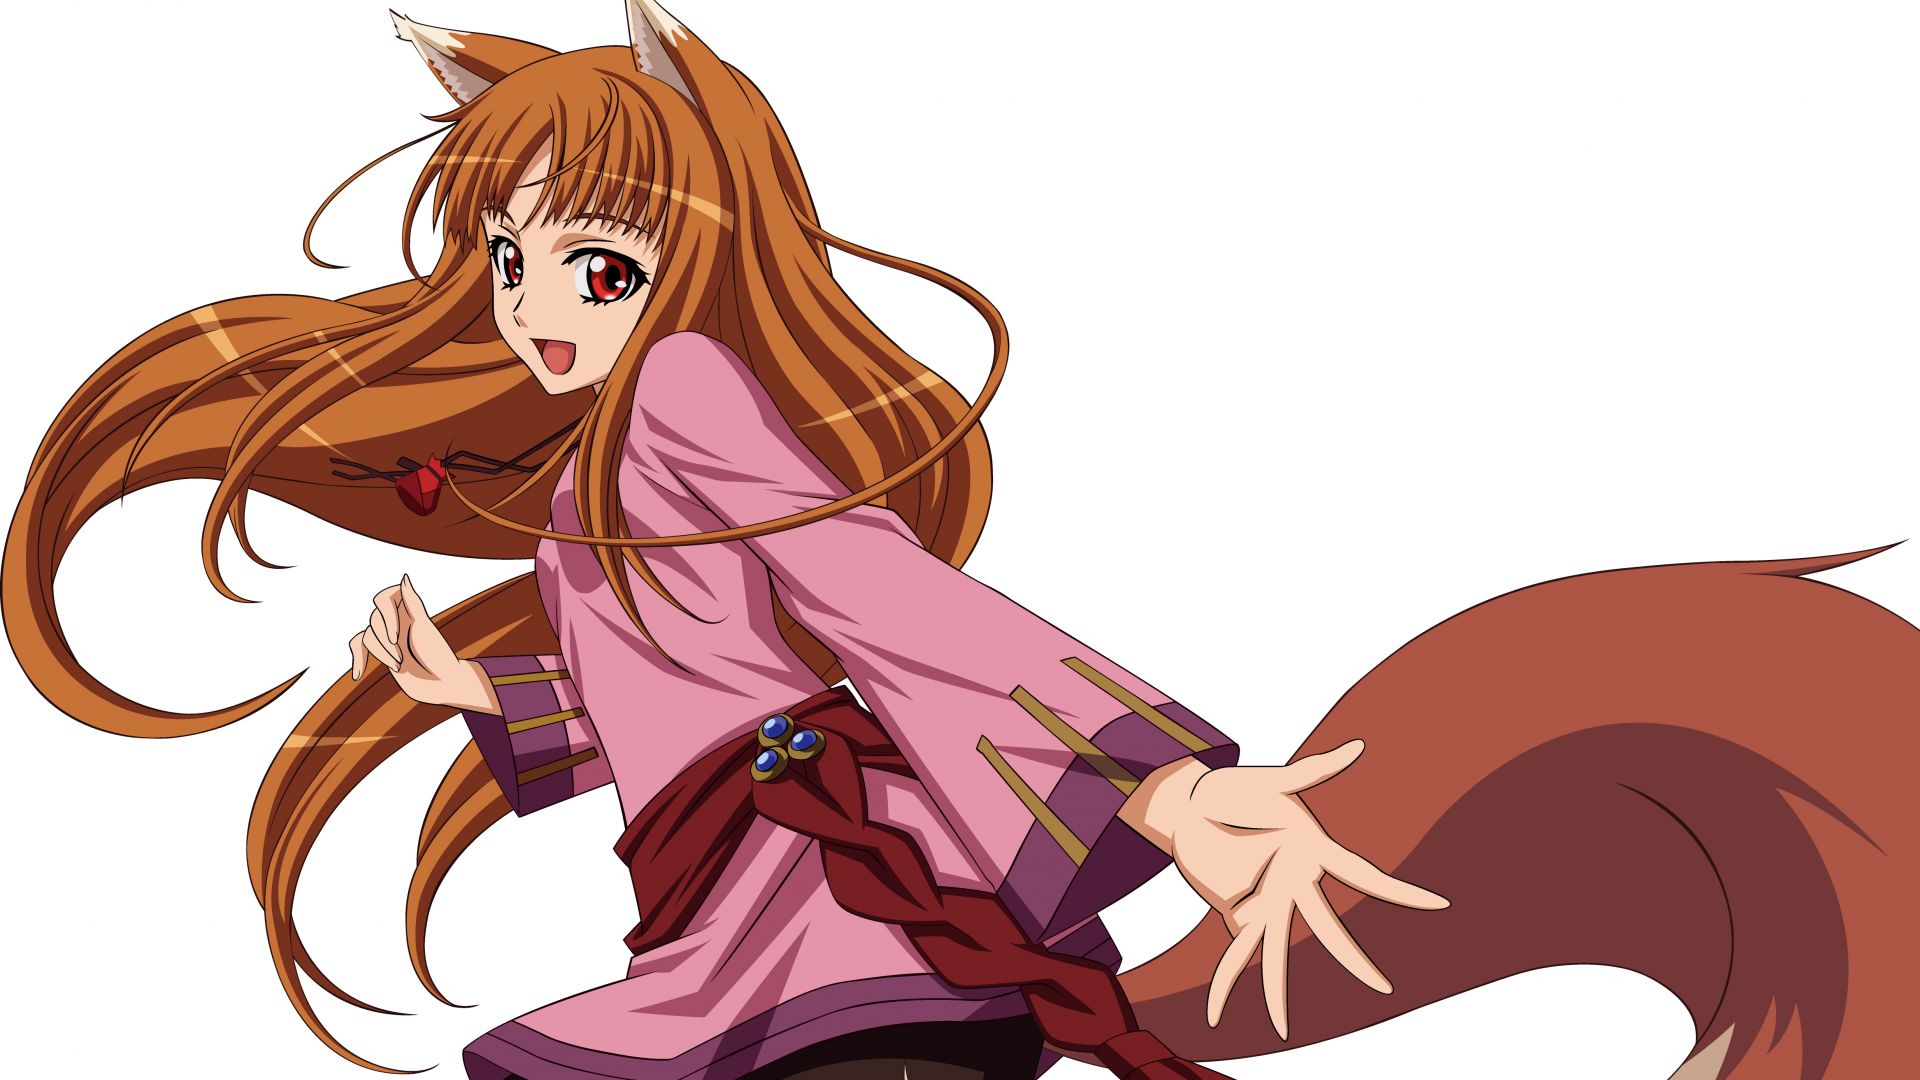 Wallpaper Spice and wolf horo girl fox